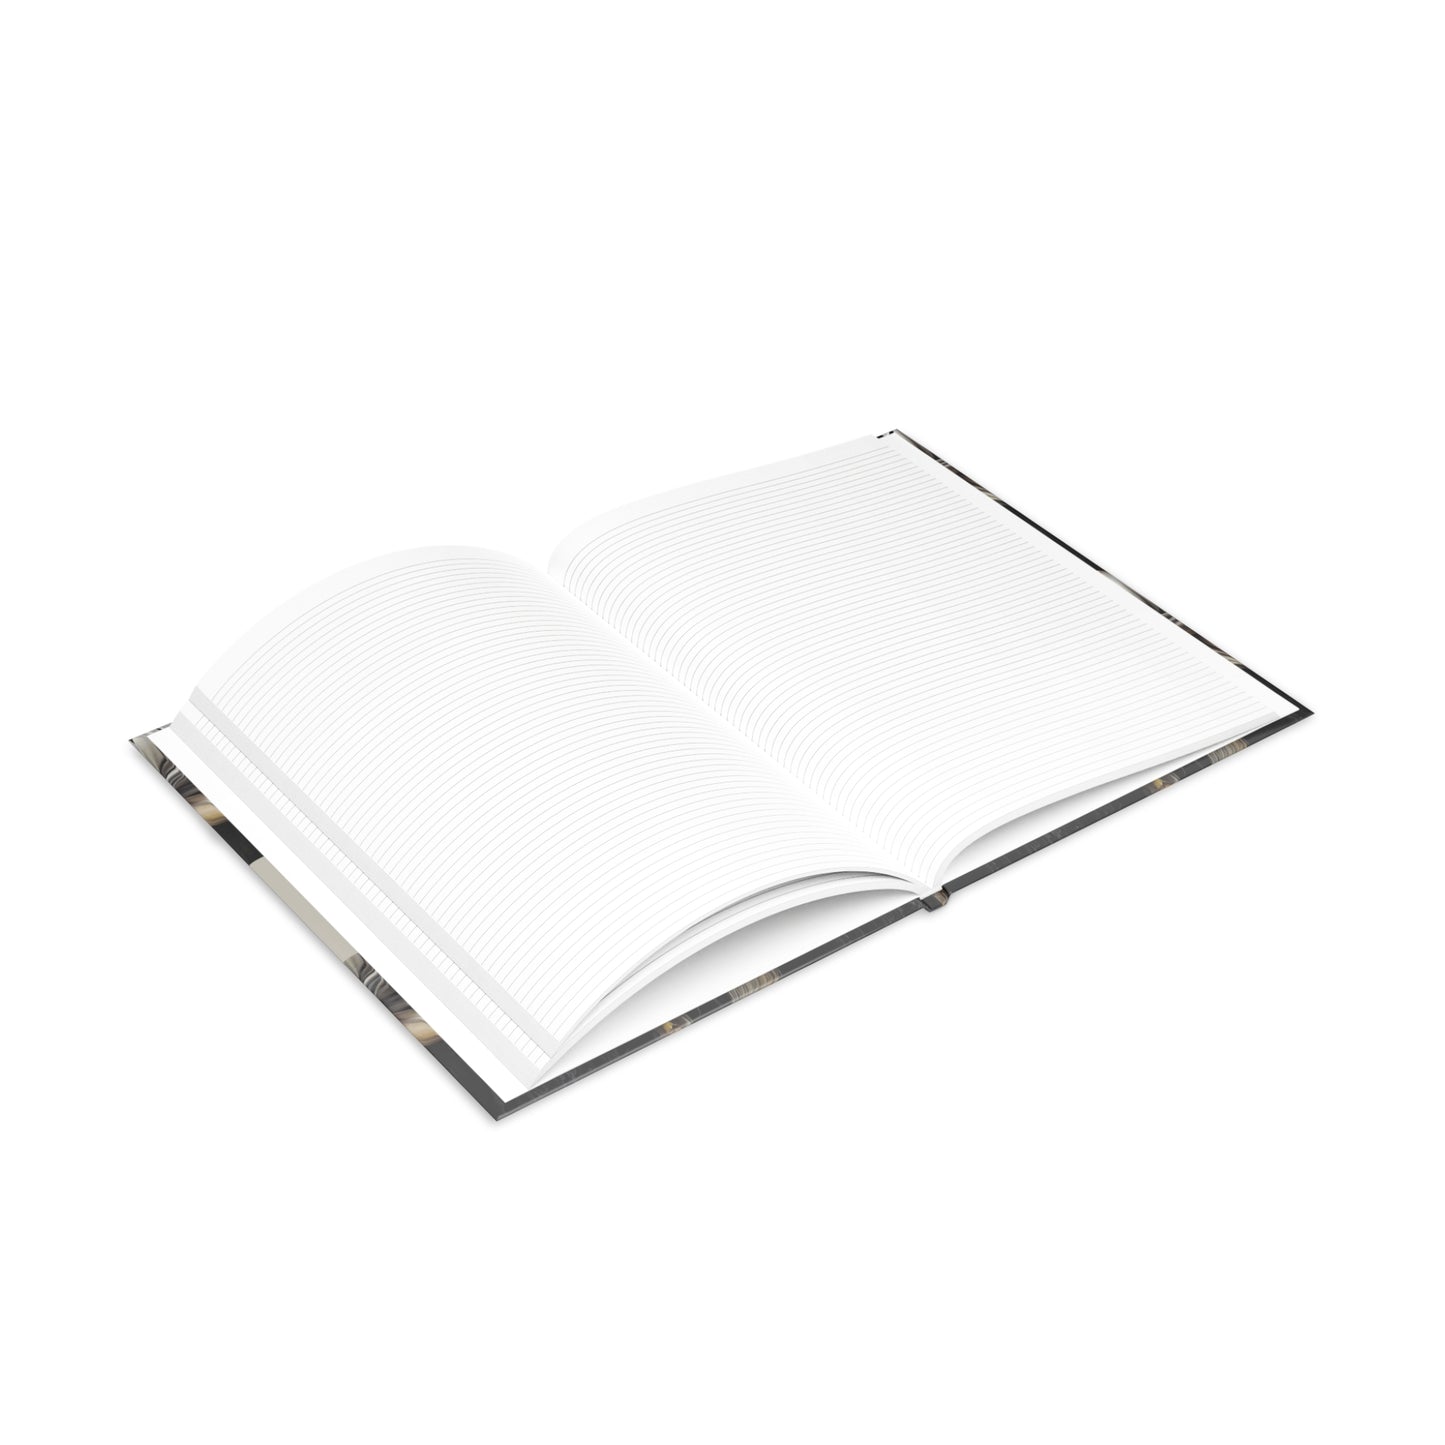 "Shadow Ink: Minimalistic Hardcover Notebook with Puffy Covers - Ideal Journal, Planner, and Gift for Writing Enthusiasts and Book Lovers"